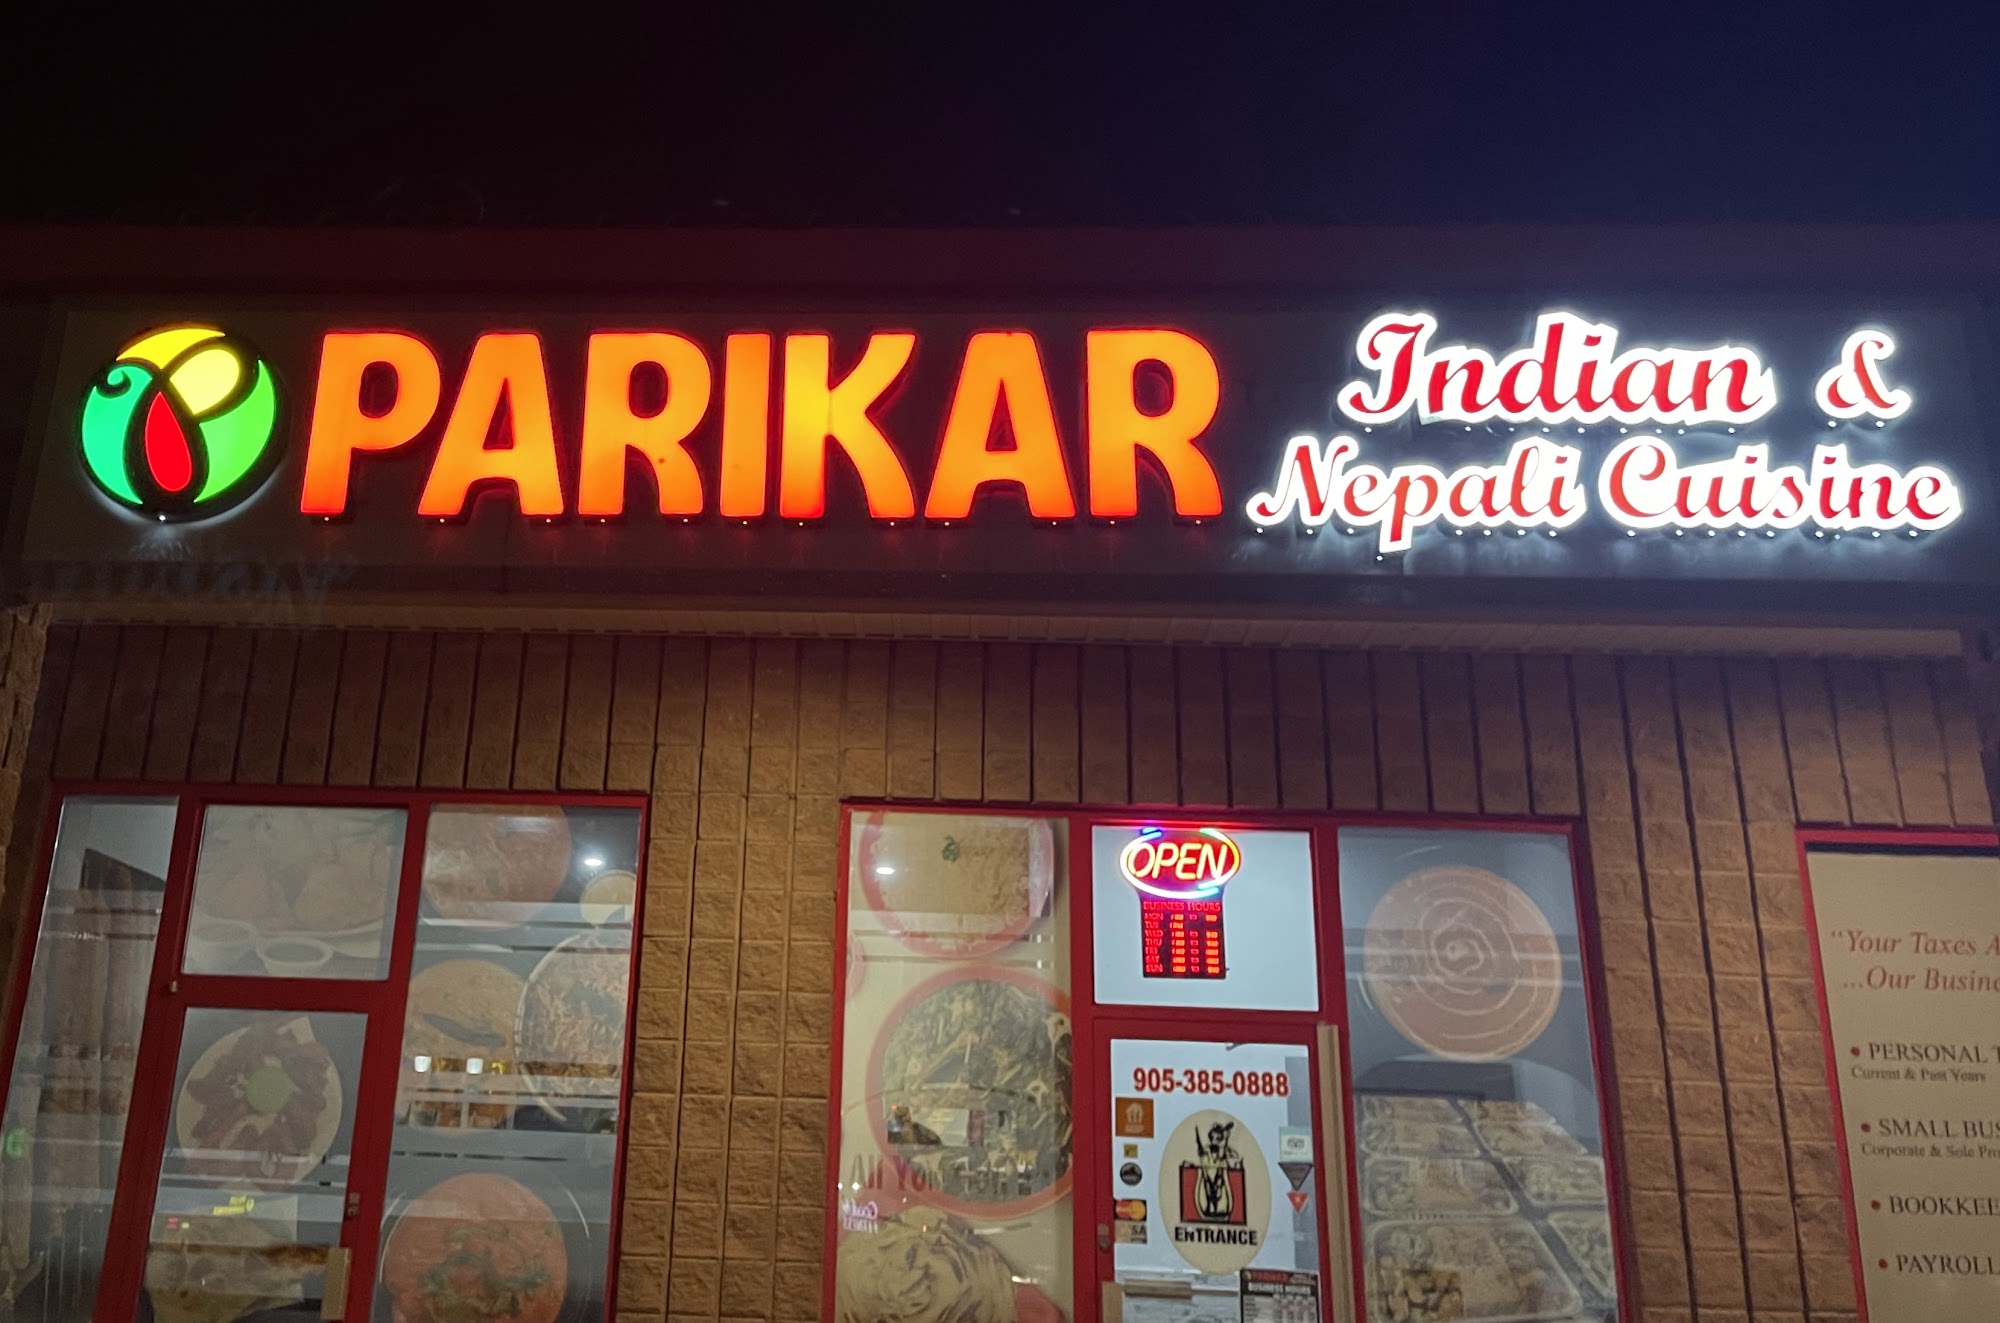 Parikar Indian and Nepali Cusine (Previously known as The Bombay Grill)